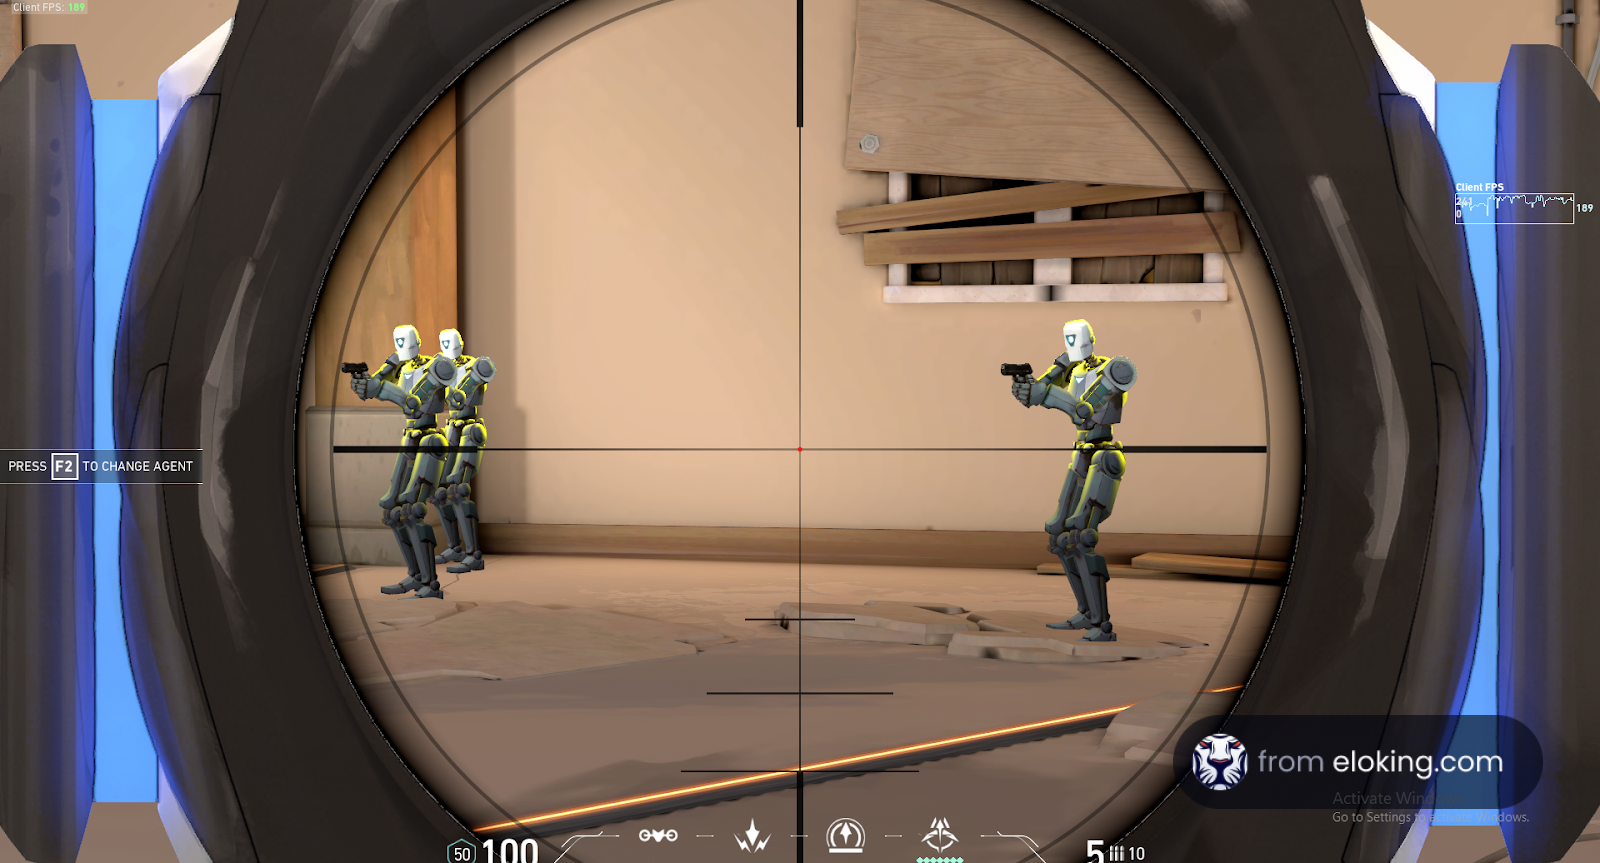 Two humanoid robots participating in a target practice session in a game